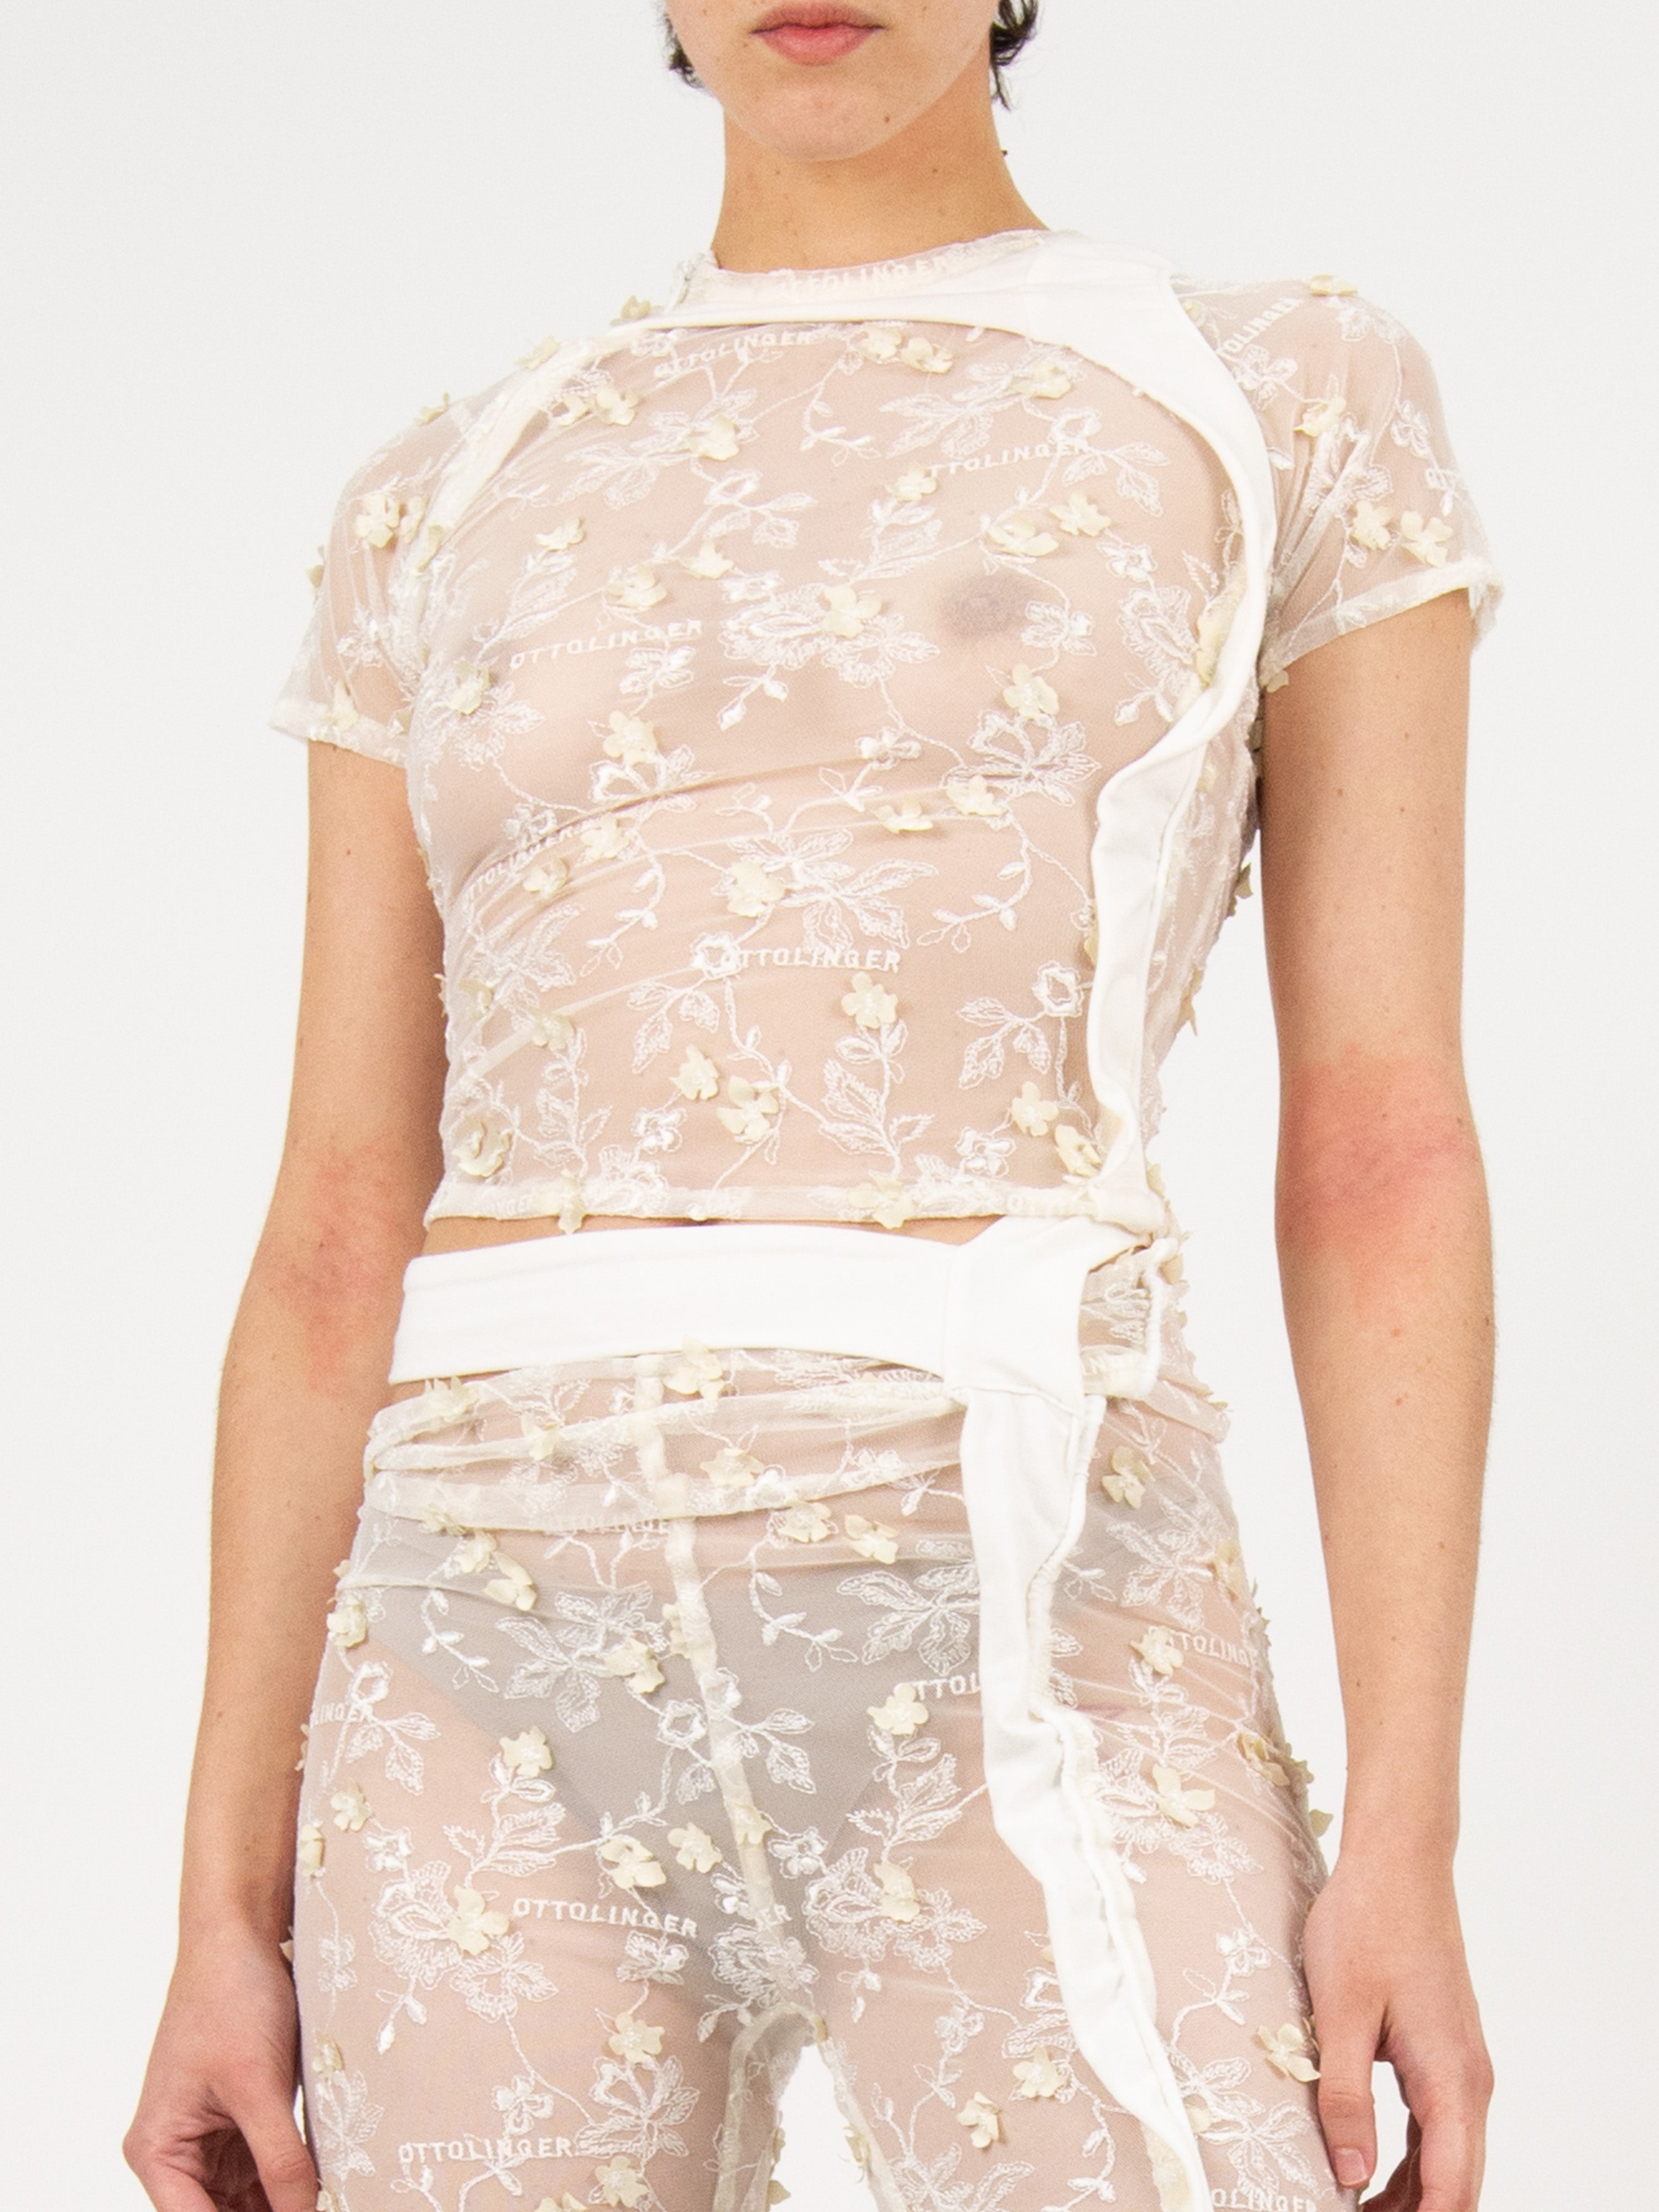 Ottolinger Lace Contrast Shirt 'Champagne'